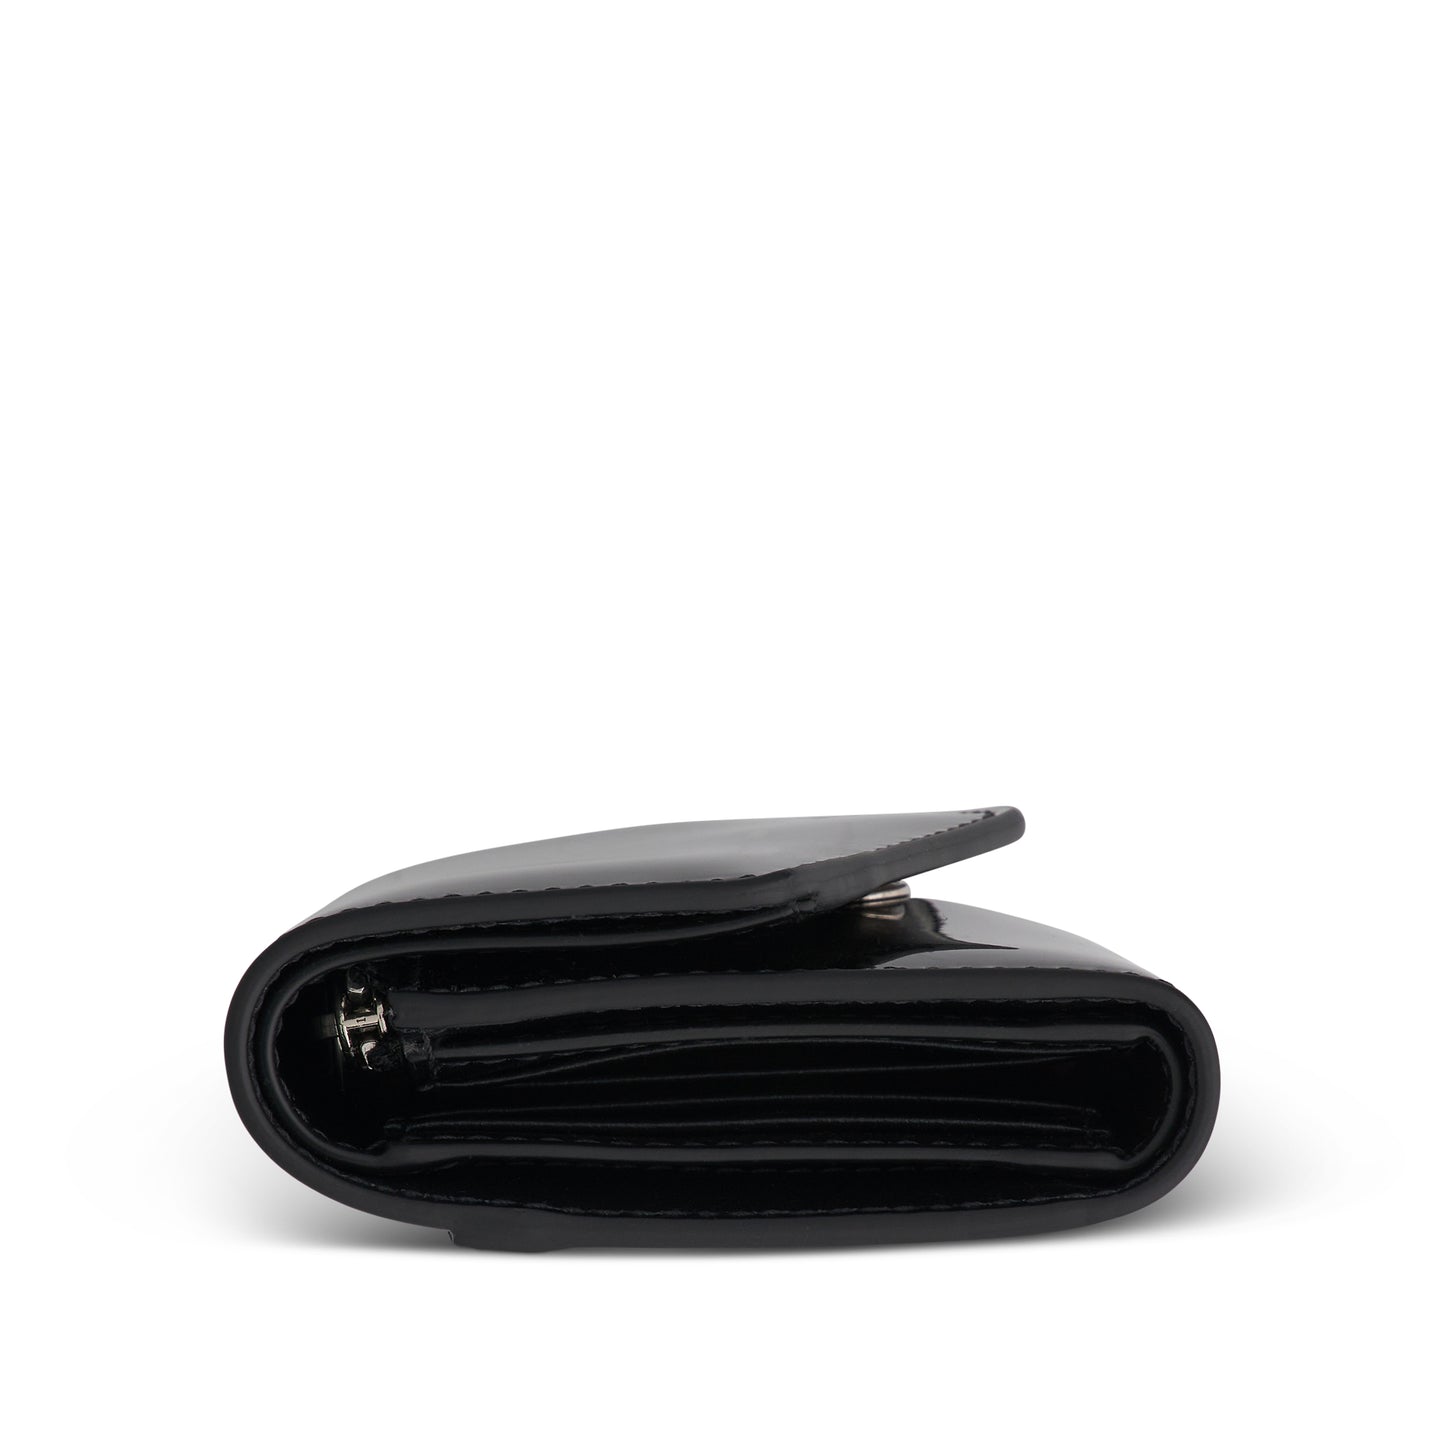 4 Stitch Patent Leather Envelope Wallet in Black